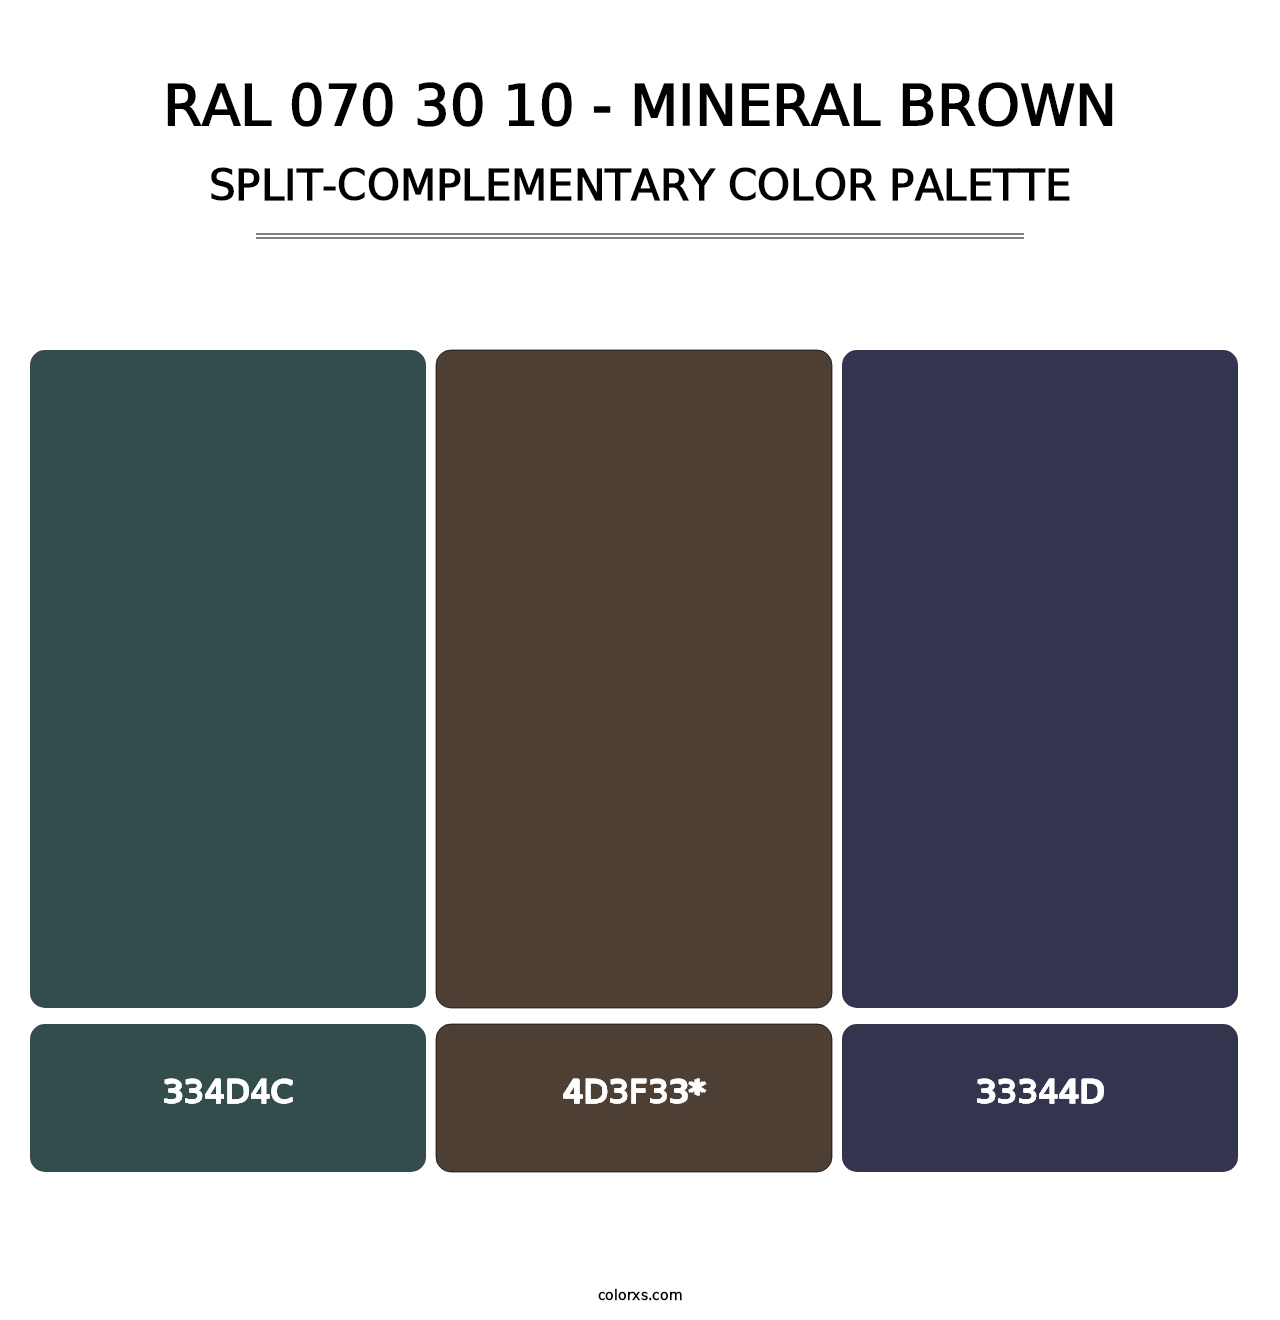 RAL 070 30 10 - Mineral Brown - Split-Complementary Color Palette